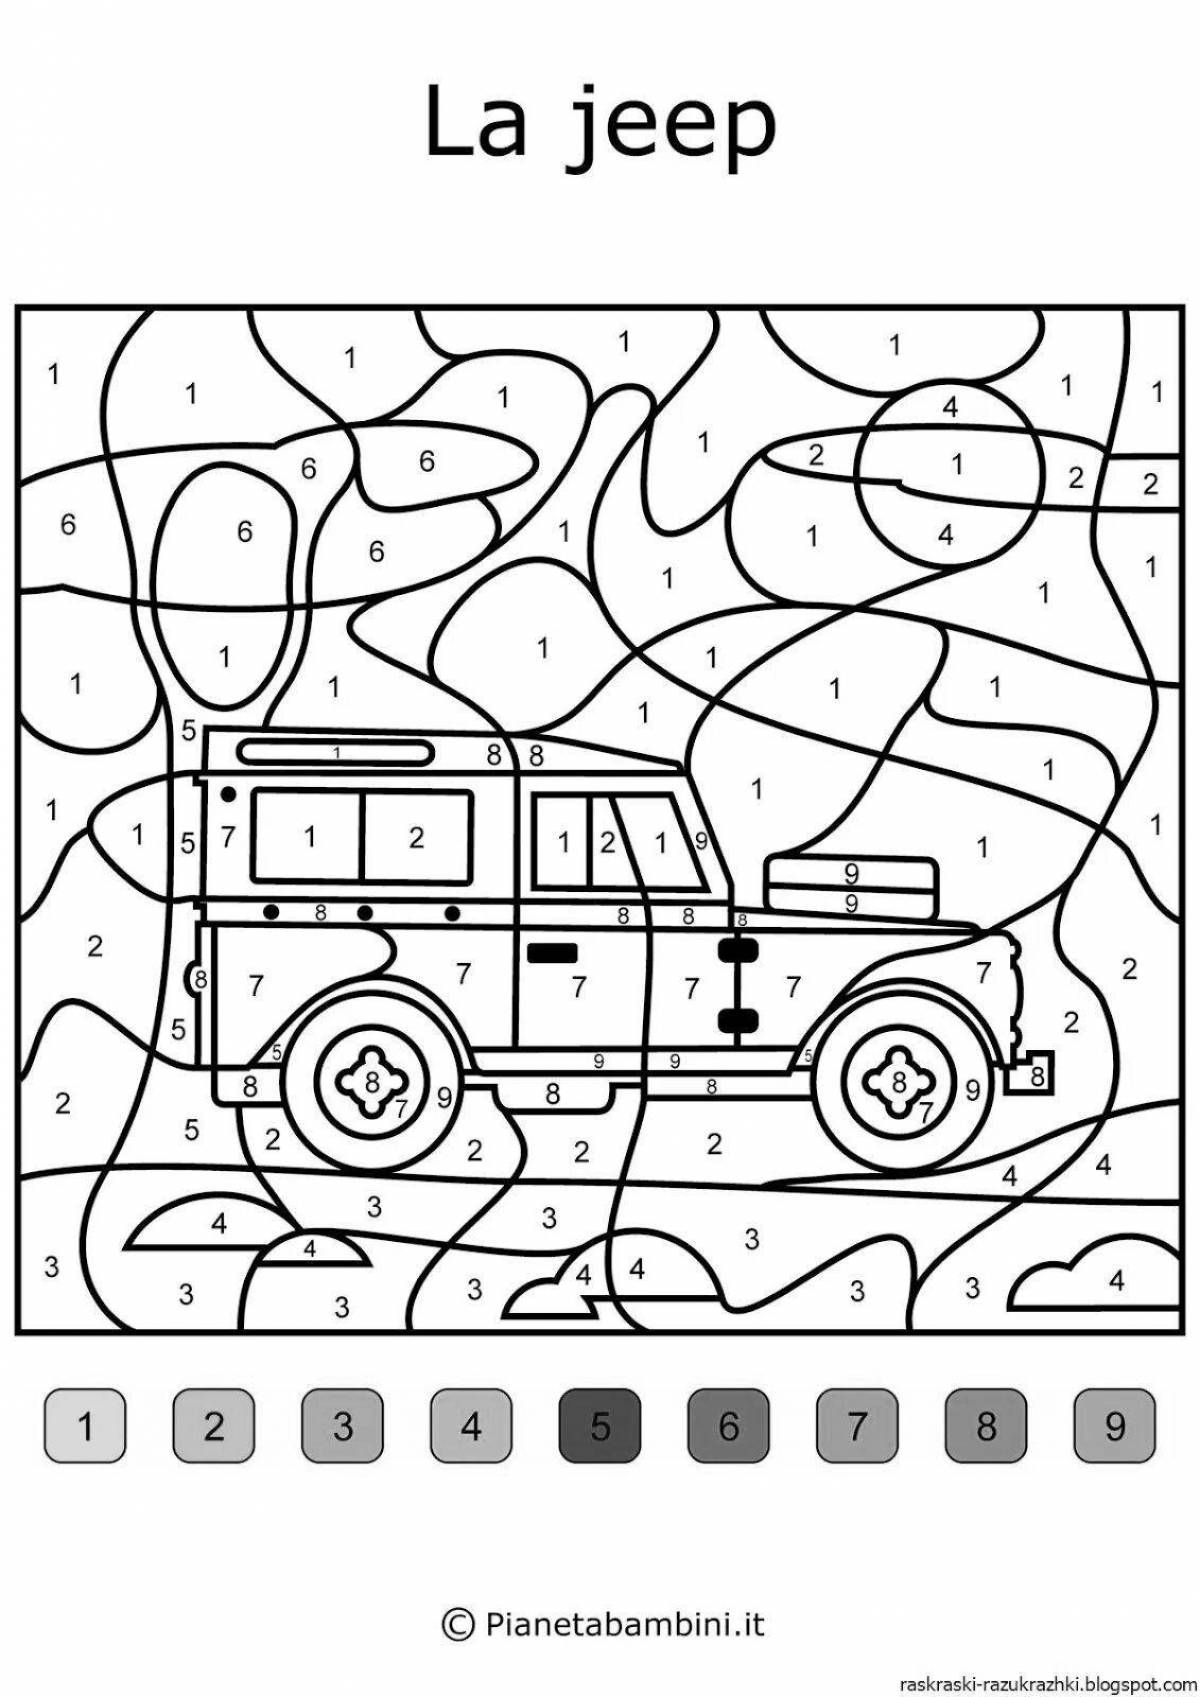 Fun coloring by numbers up to 5 for kids